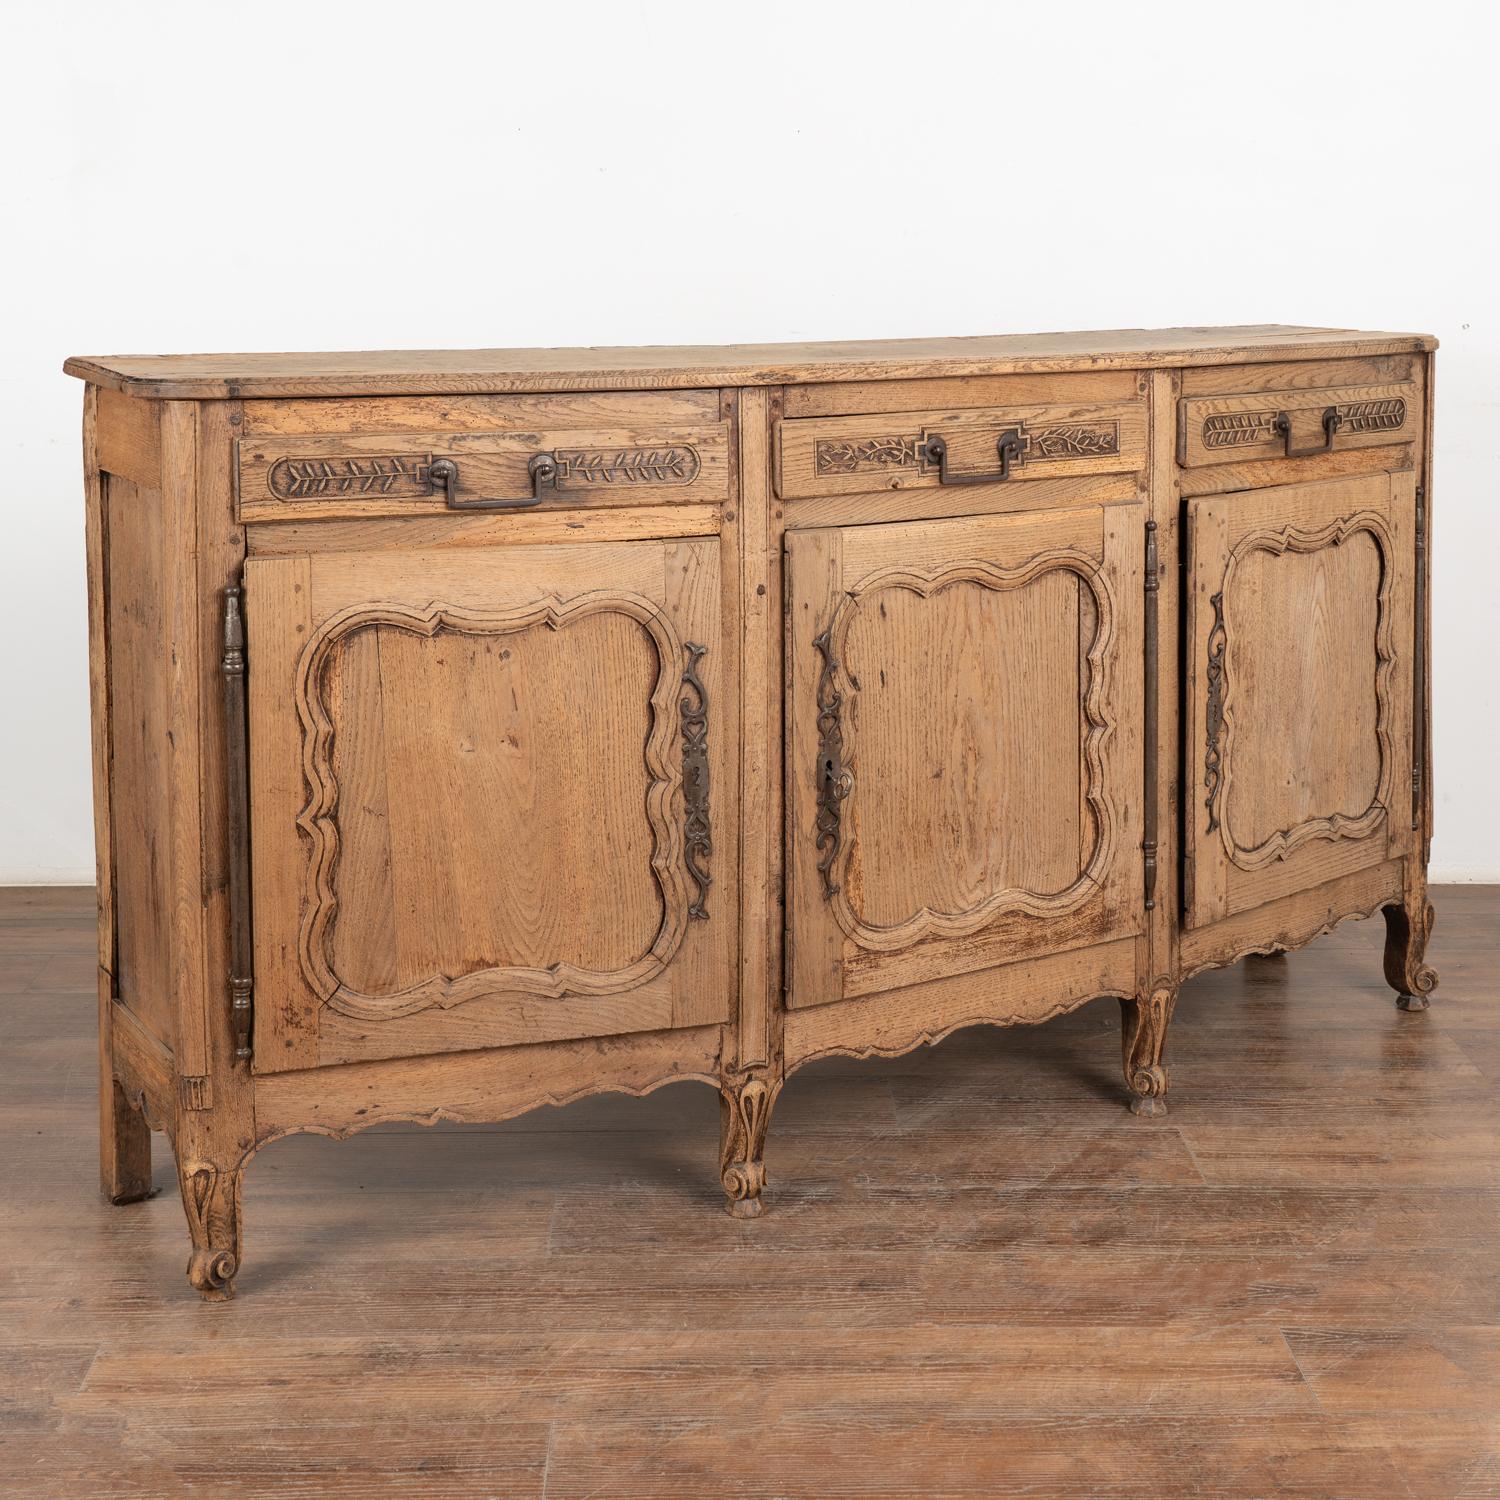 6' long French bleached oak sideboard with unique convex/bow front, traditional carved panel doors and carved vine details along 3 drawers.
This lovely oak buffet rests on carved cabriolet feet.
Middle cabinet door has a key and does lock. End doors